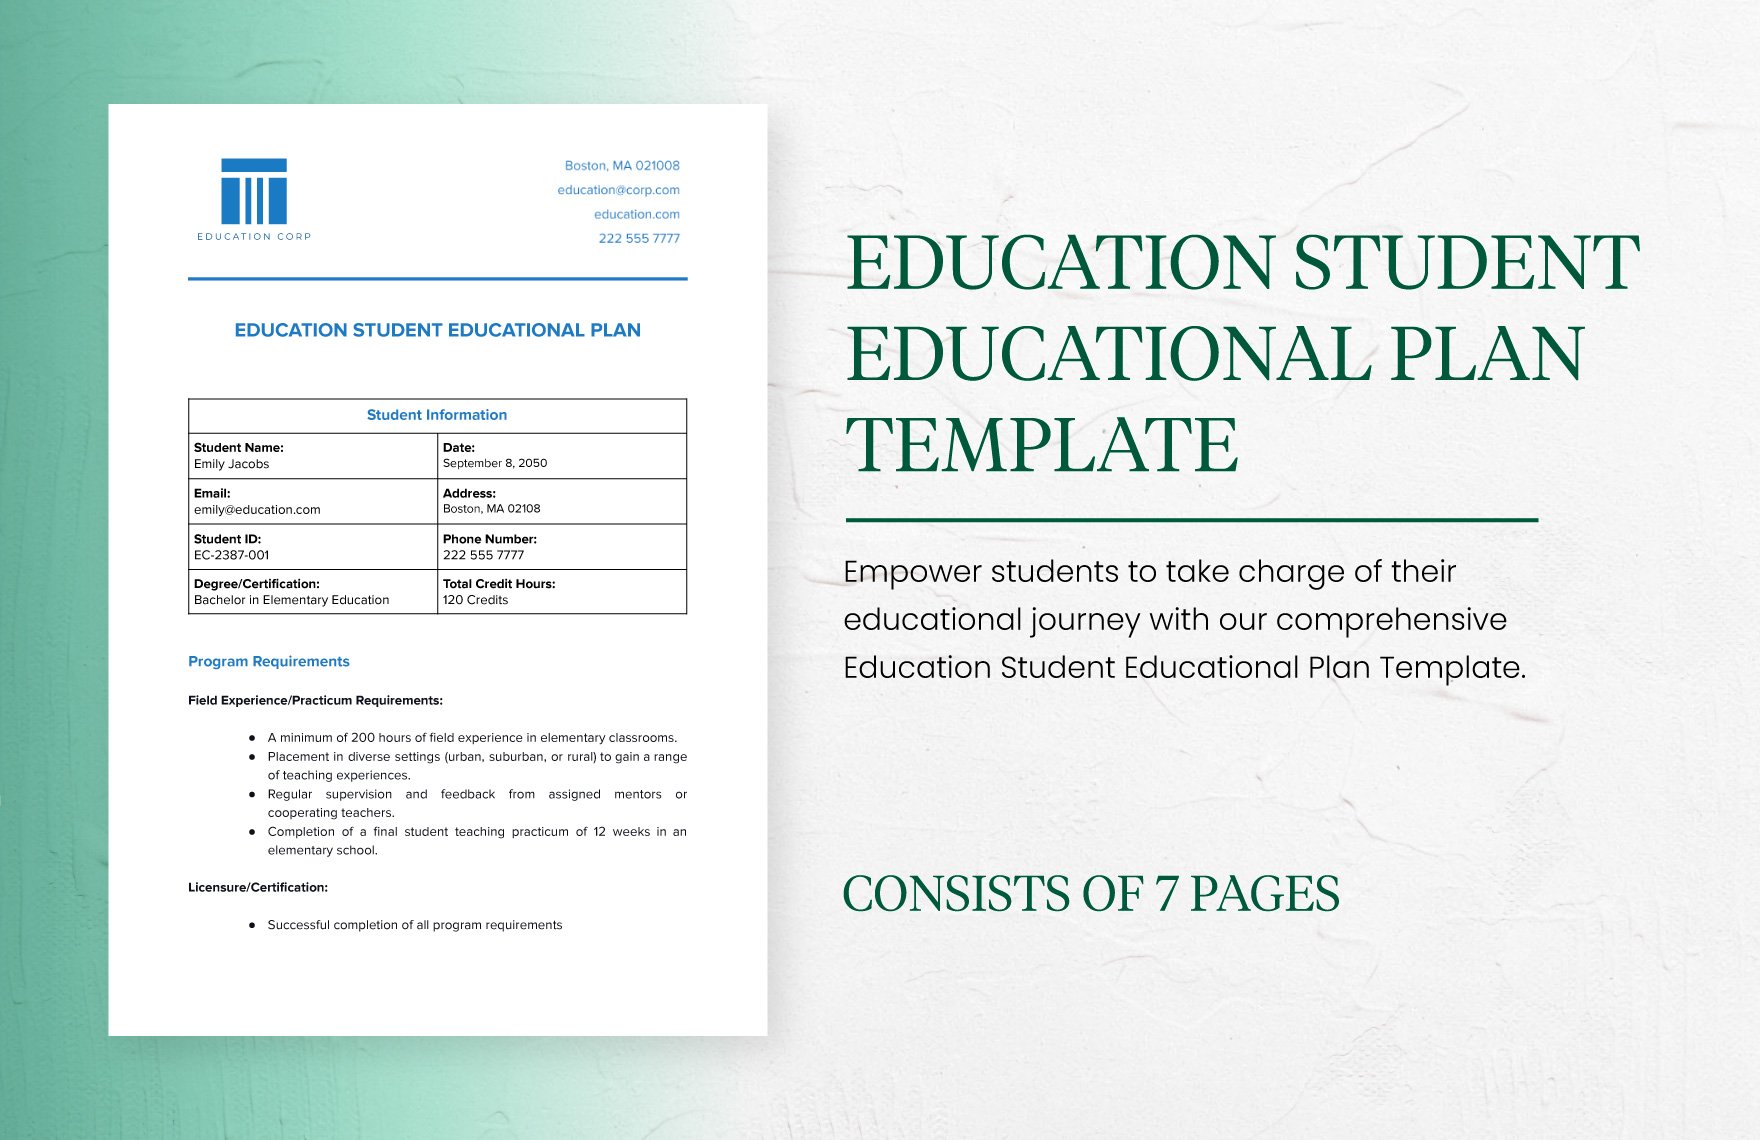 Education Student Educational Plan Template